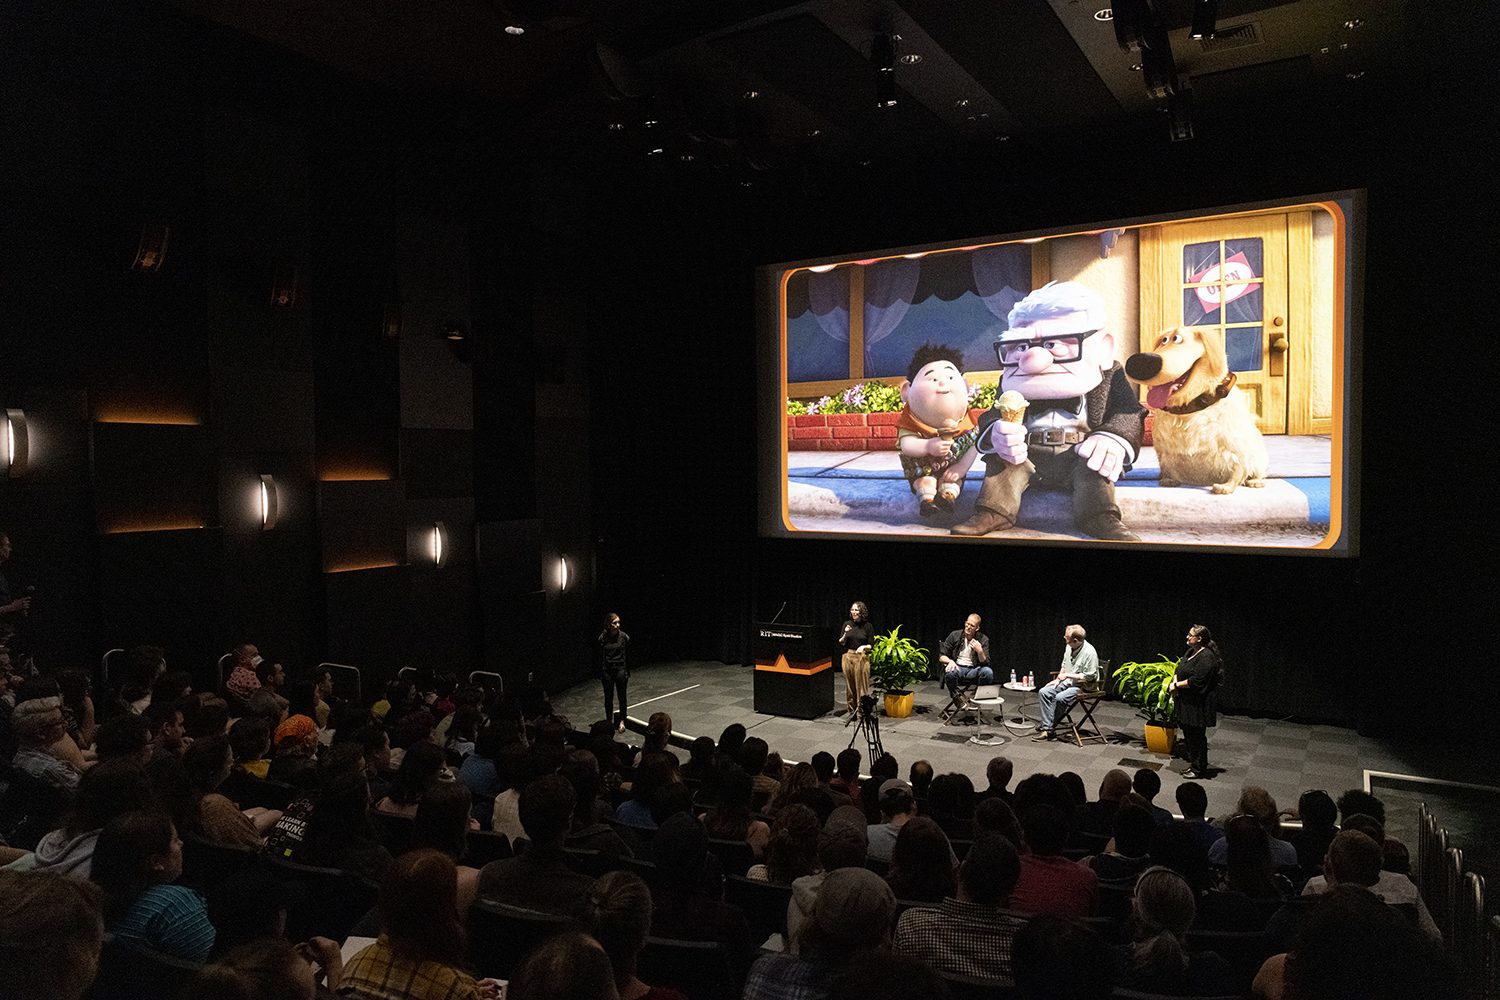 A full Wegmans theater watches a presentation by Pete Docter, with a scene from the animated film Up on the screen.